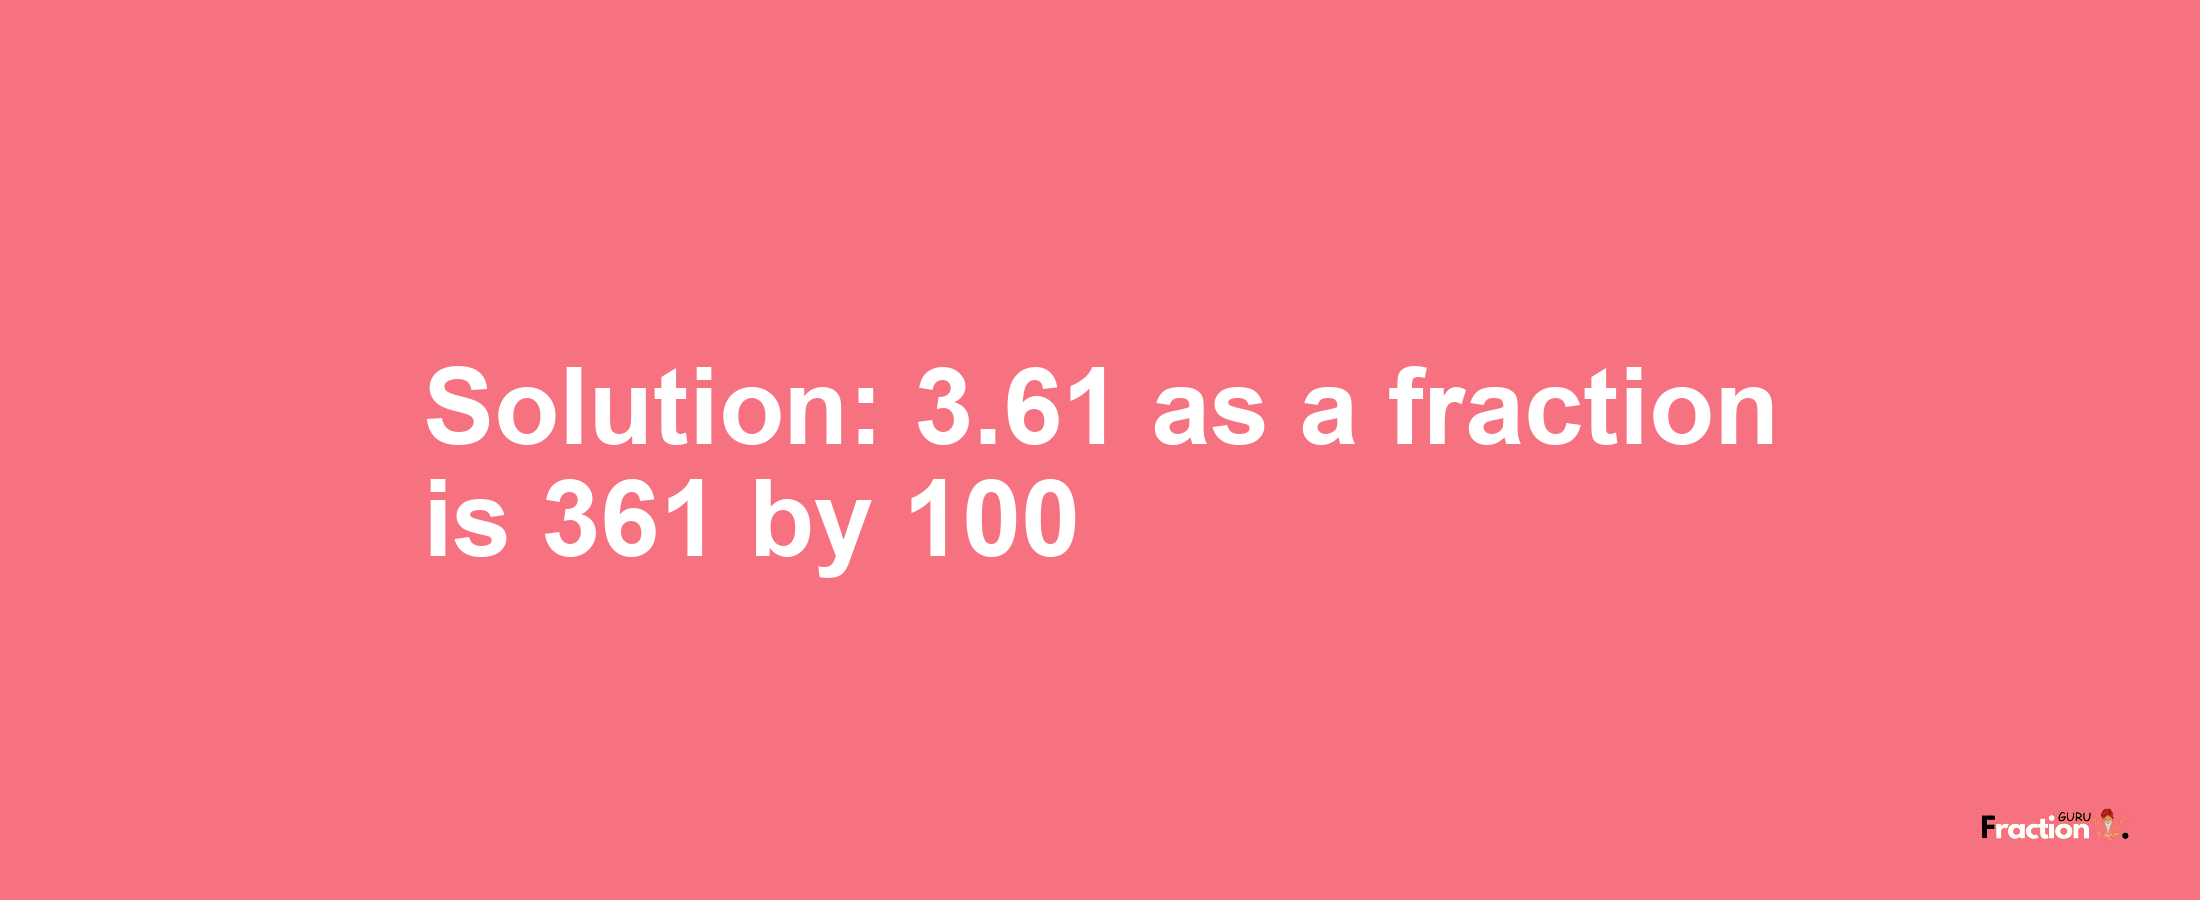 Solution:3.61 as a fraction is 361/100